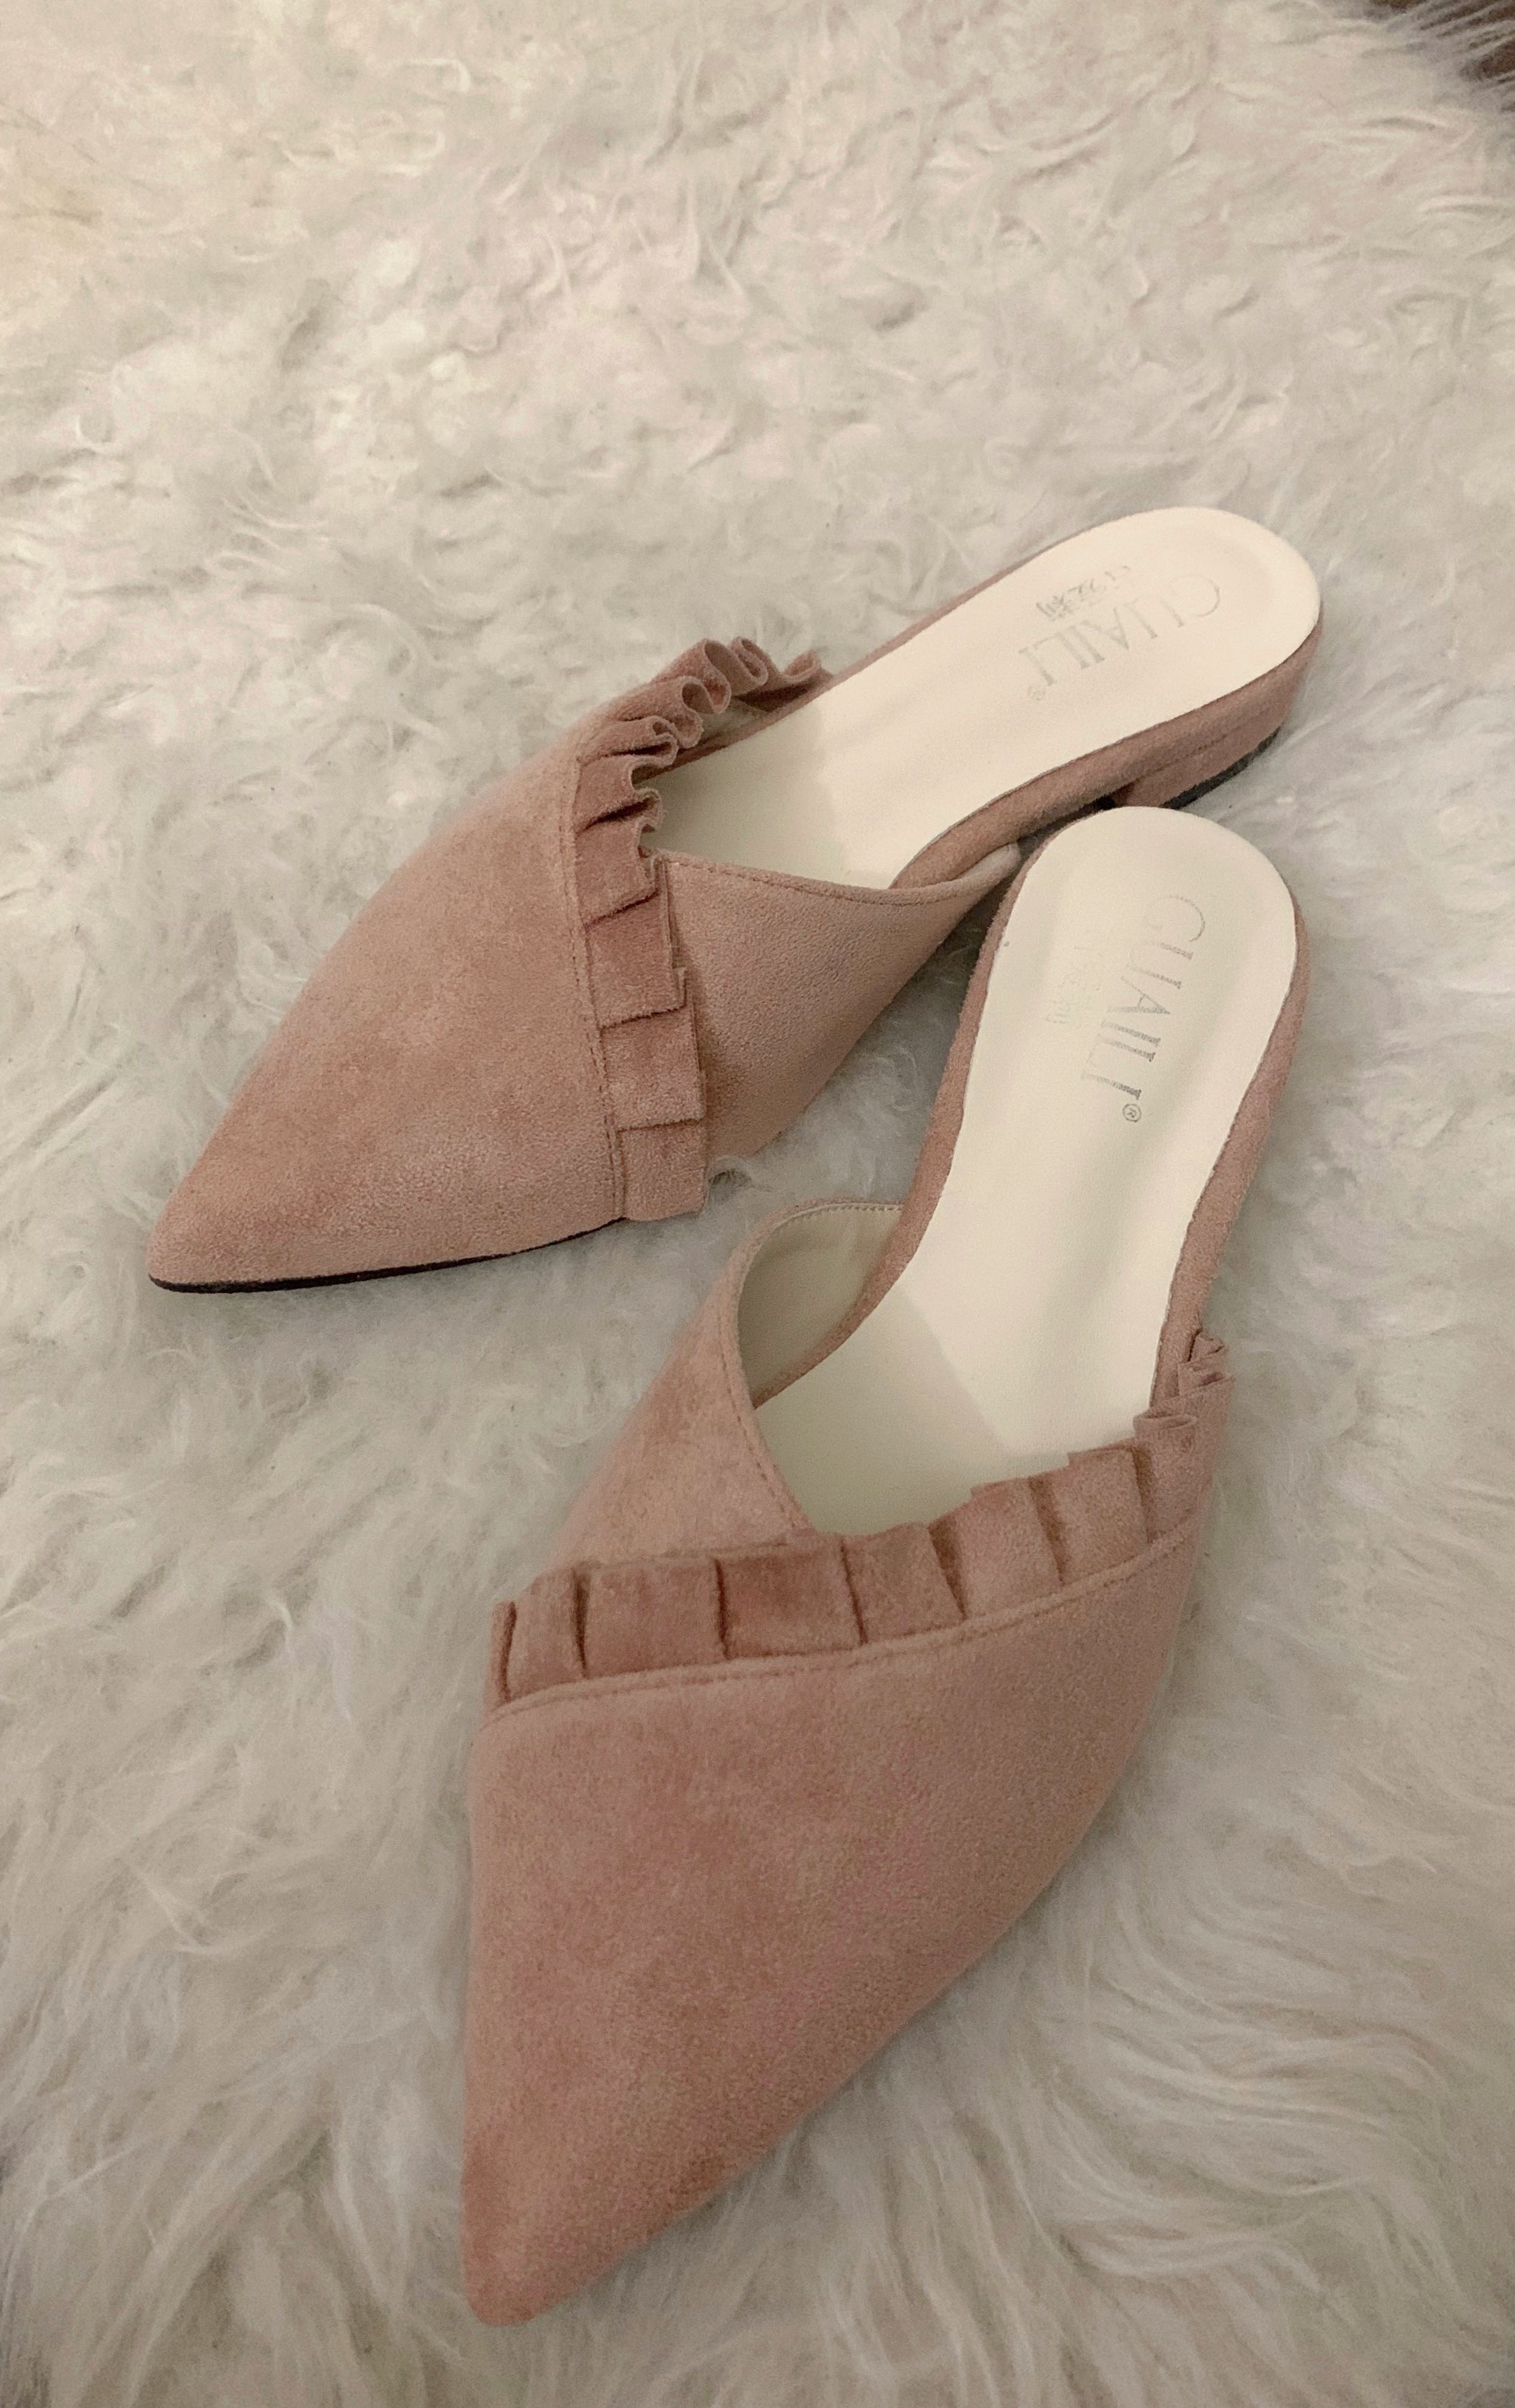 pink suede mules